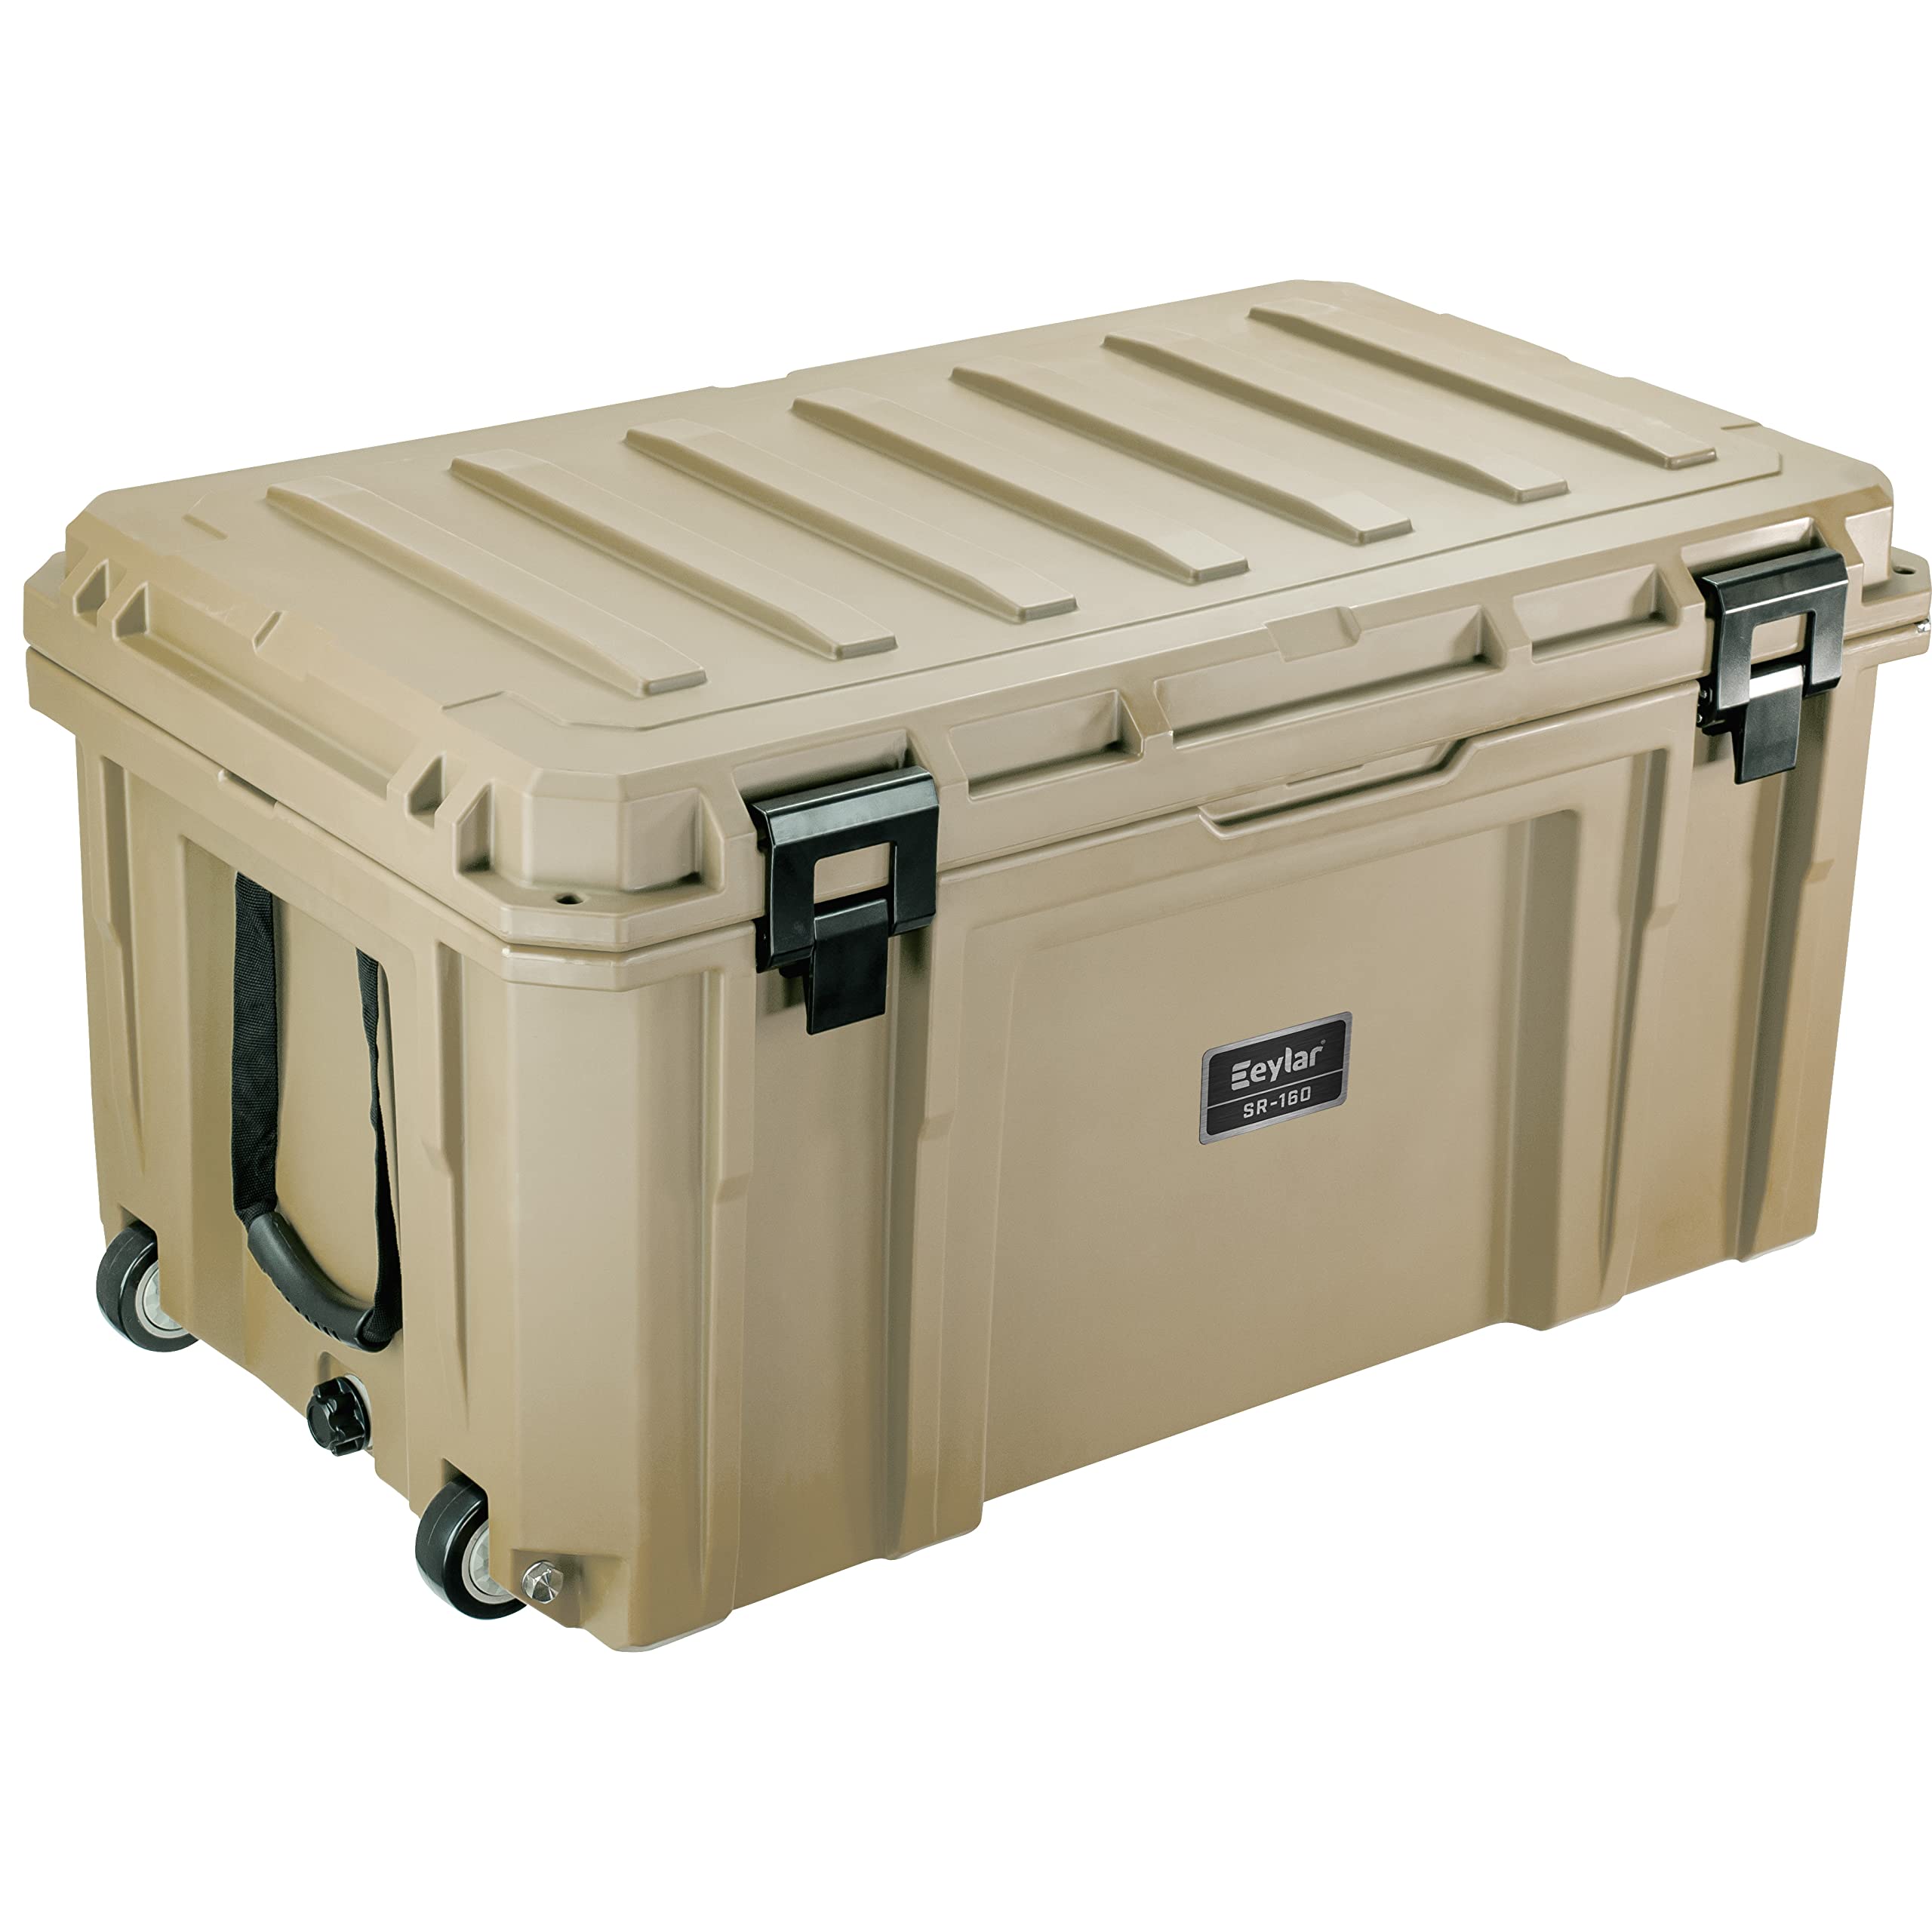 SR-160 XL Crossover Overland Roller Cargo Case, Equipment Hard Case, Roto Molded, Stackable with Pad-Lock Hasp, Strap Mountable, TSA Standard, IPX4 Rated, 160 Liters (Tan)